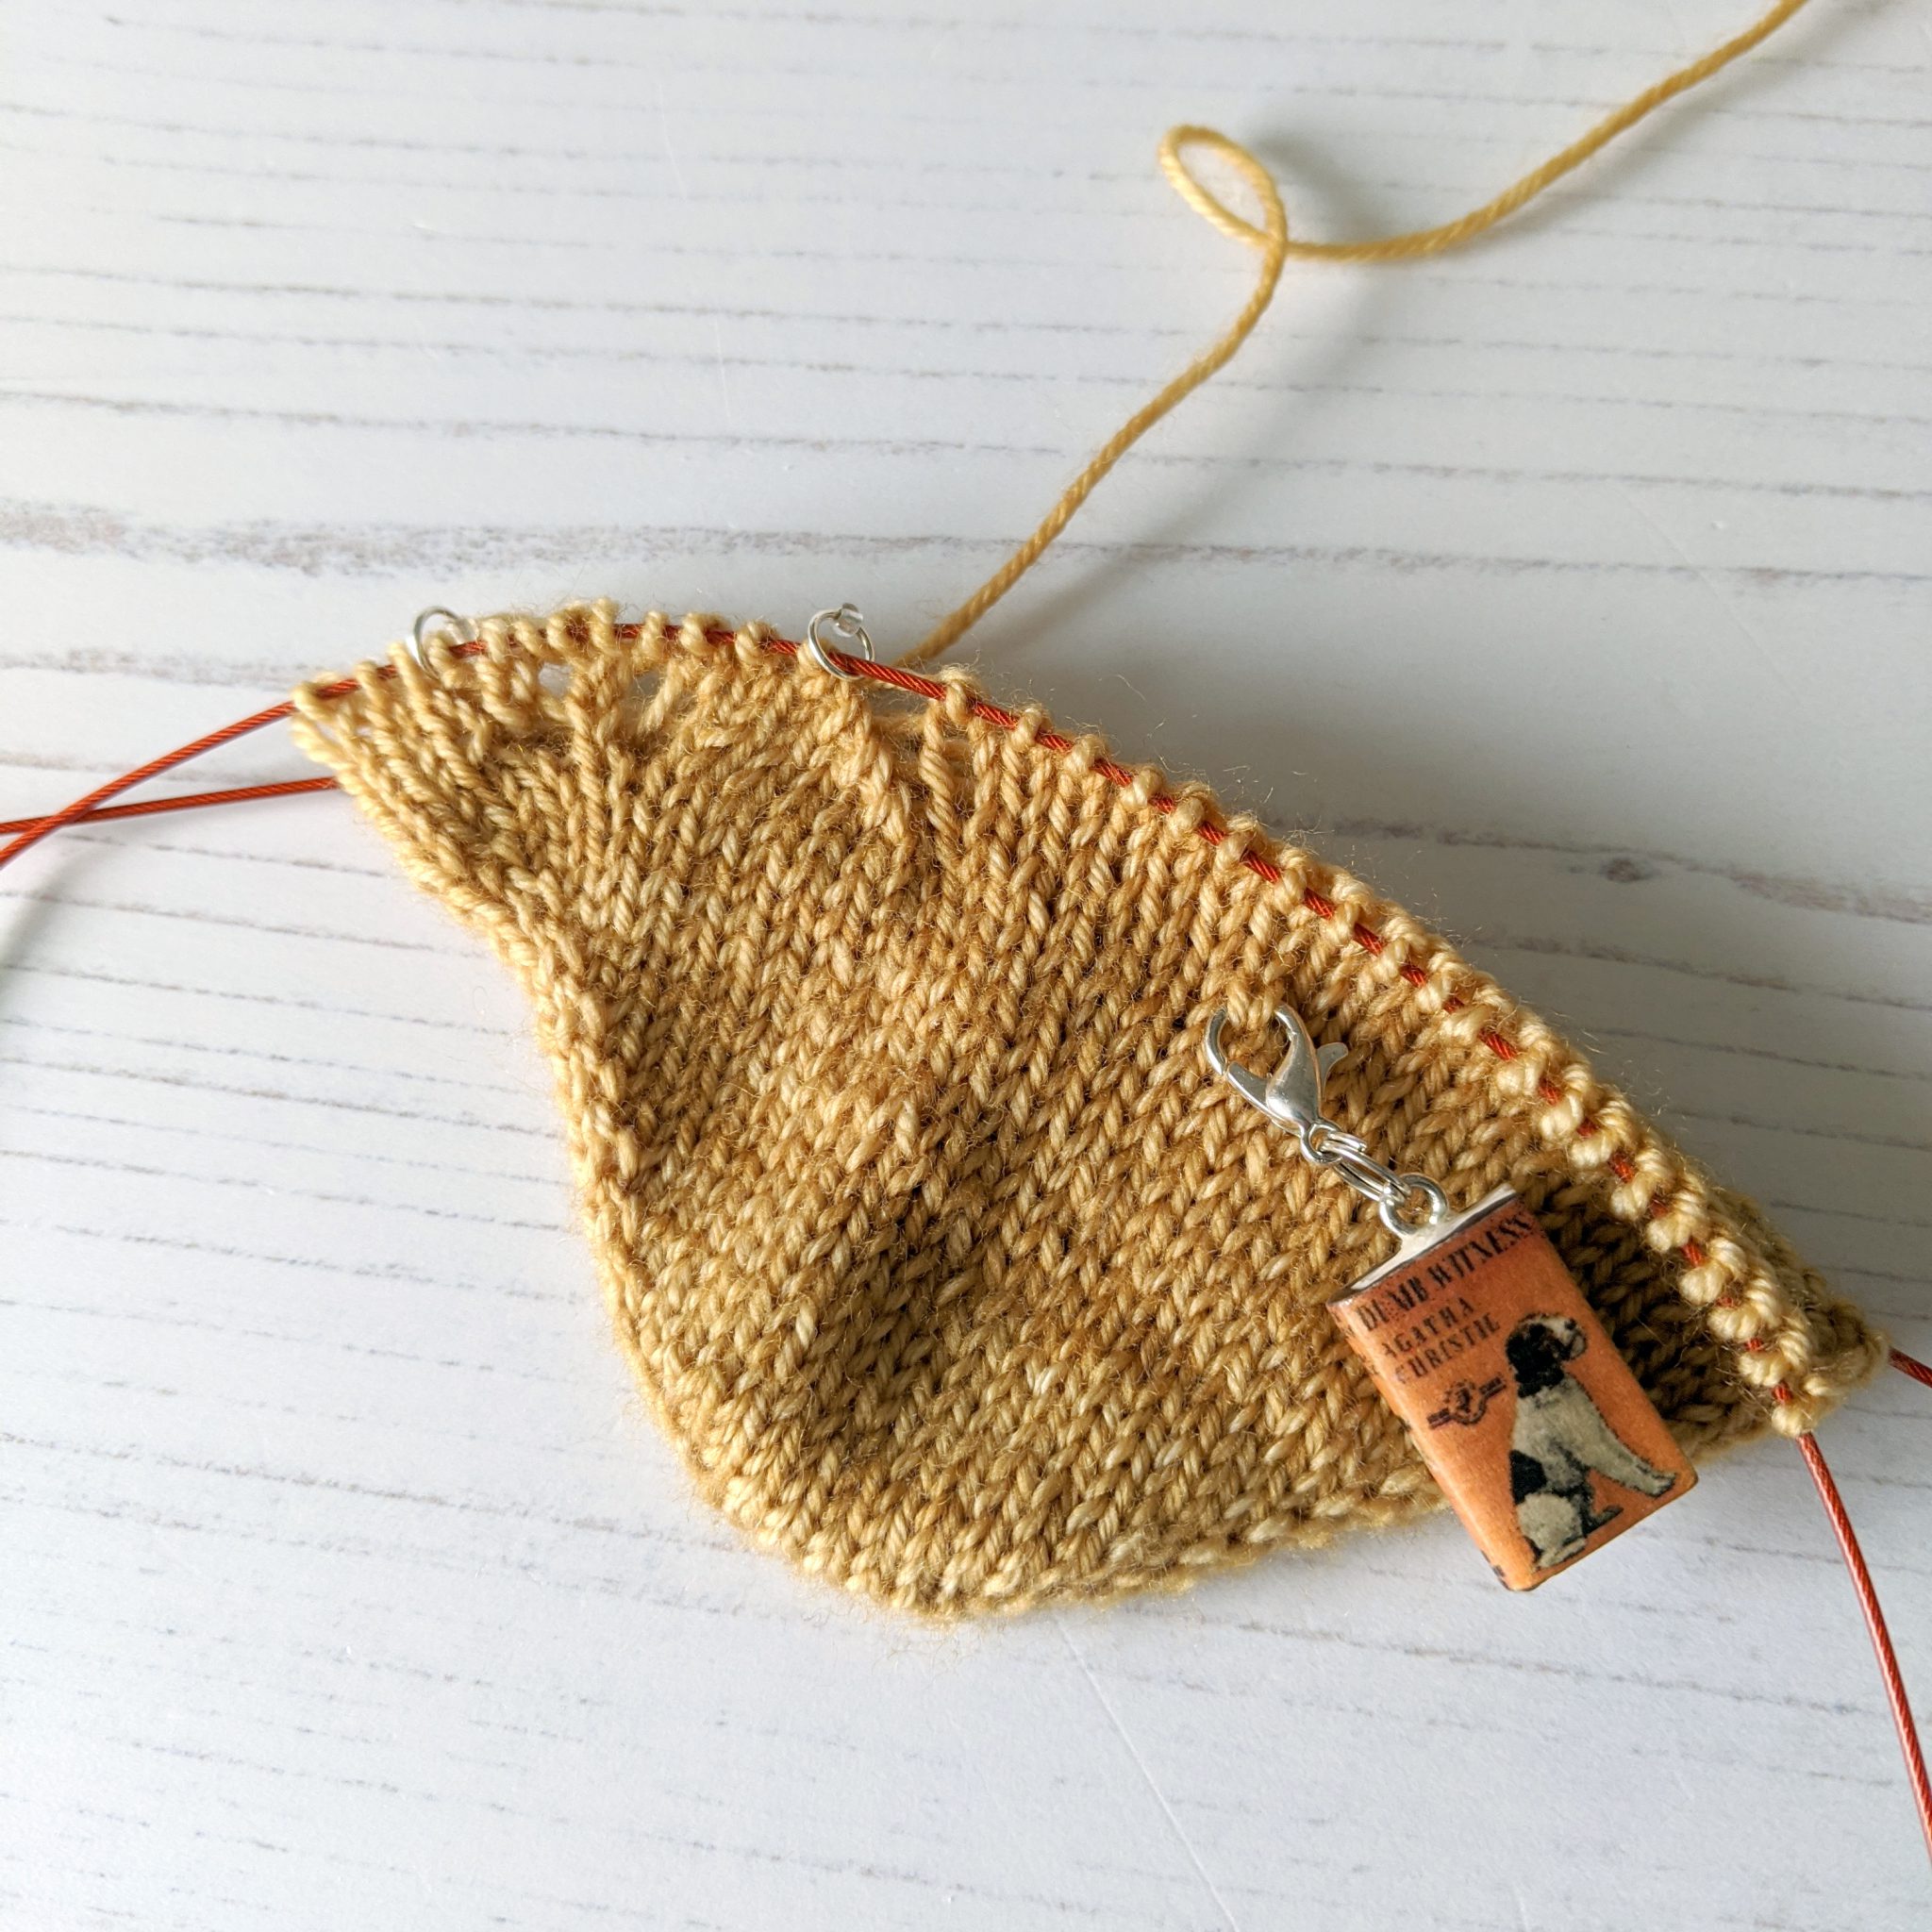 The in-progress knitted toe of a sock with a gap forming between a vertical line of decreases and the stitches to the right of it.